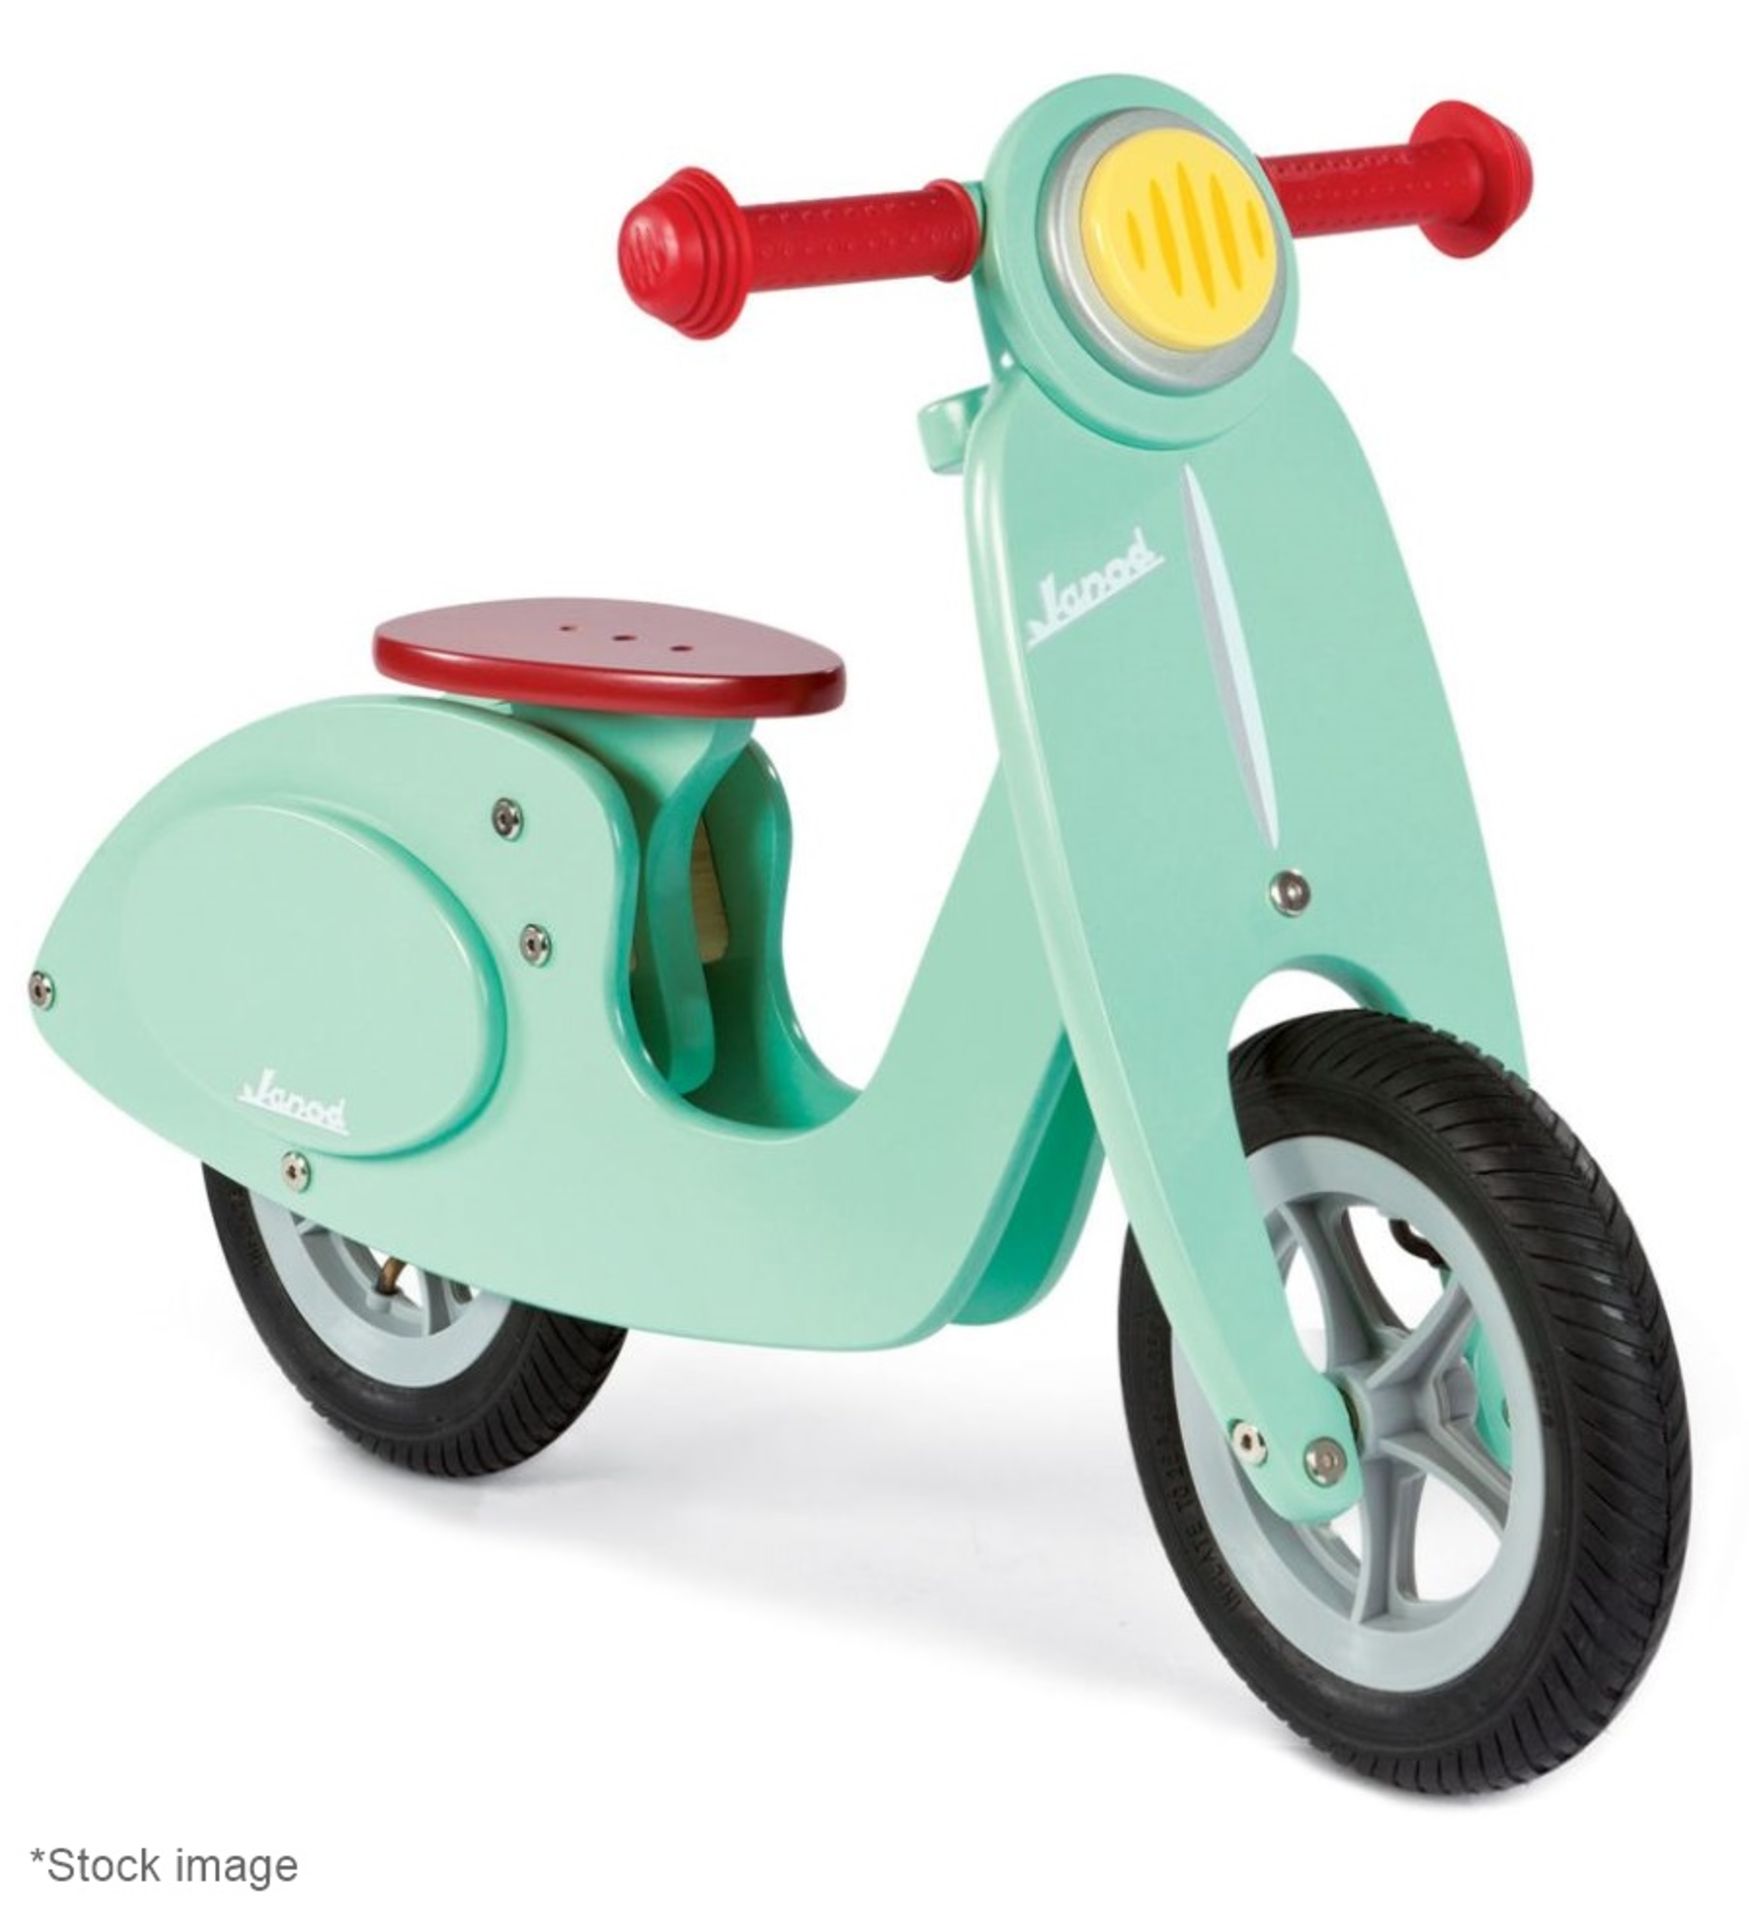 1 x JANOD Wooden Toy Scooter Balance Bike - Original Price £94.99 - Unused Boxed Stock - Ref: